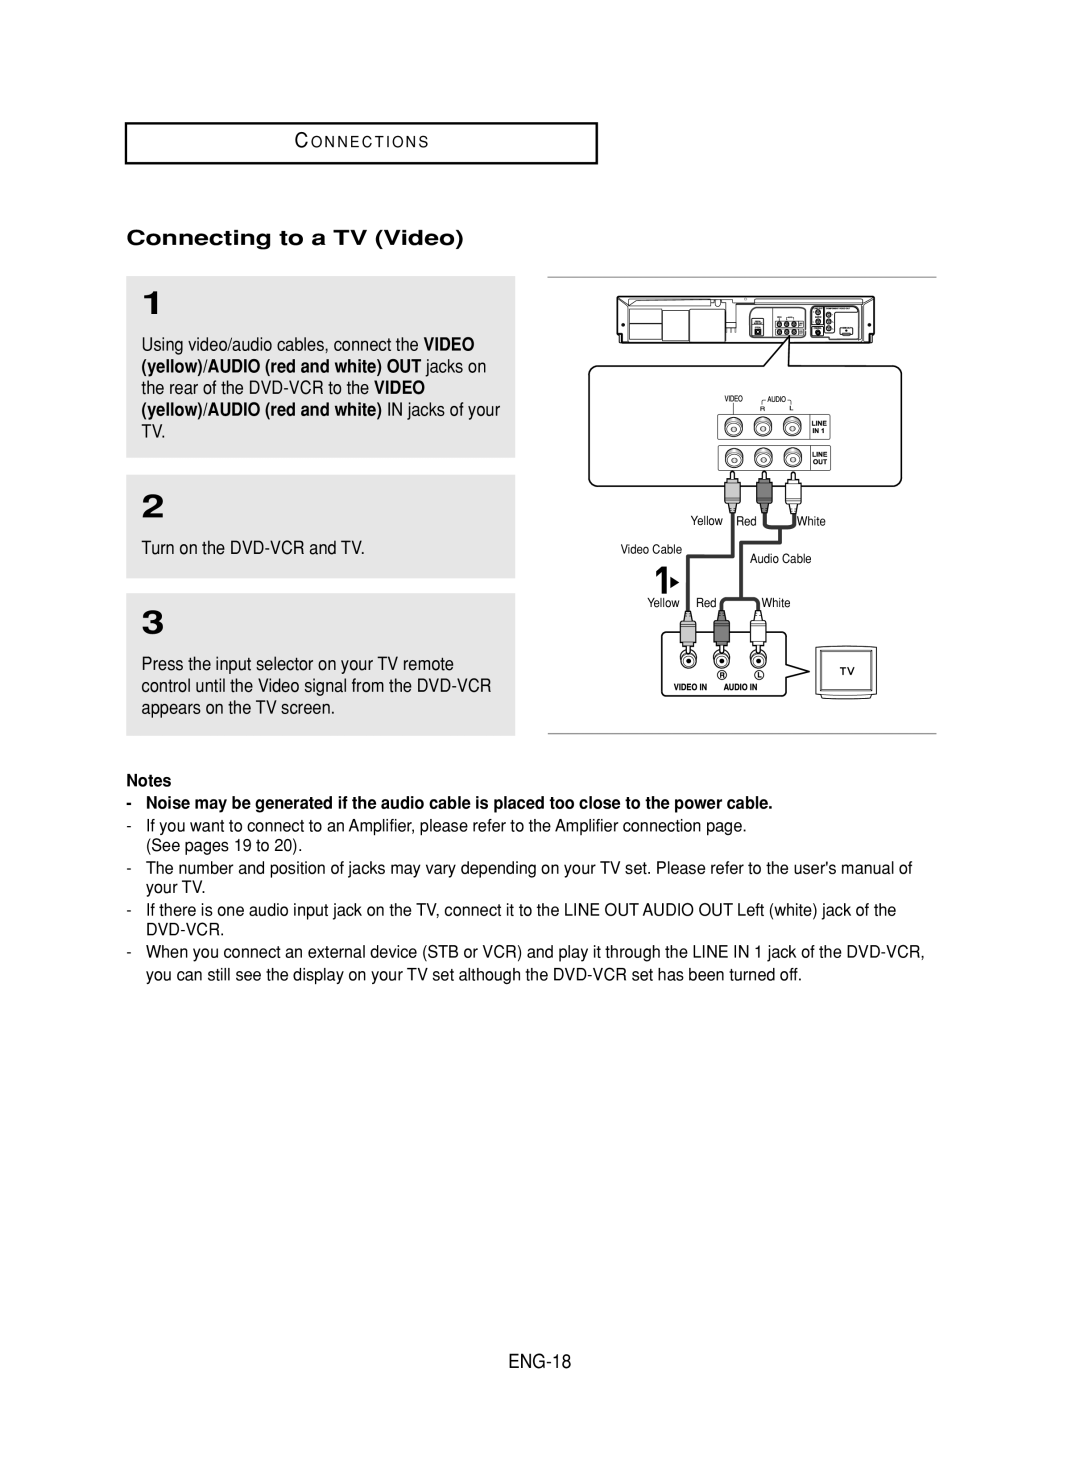 Samsung DVD-V9800 instruction manual Connecting to a TV Video, ENG-18 